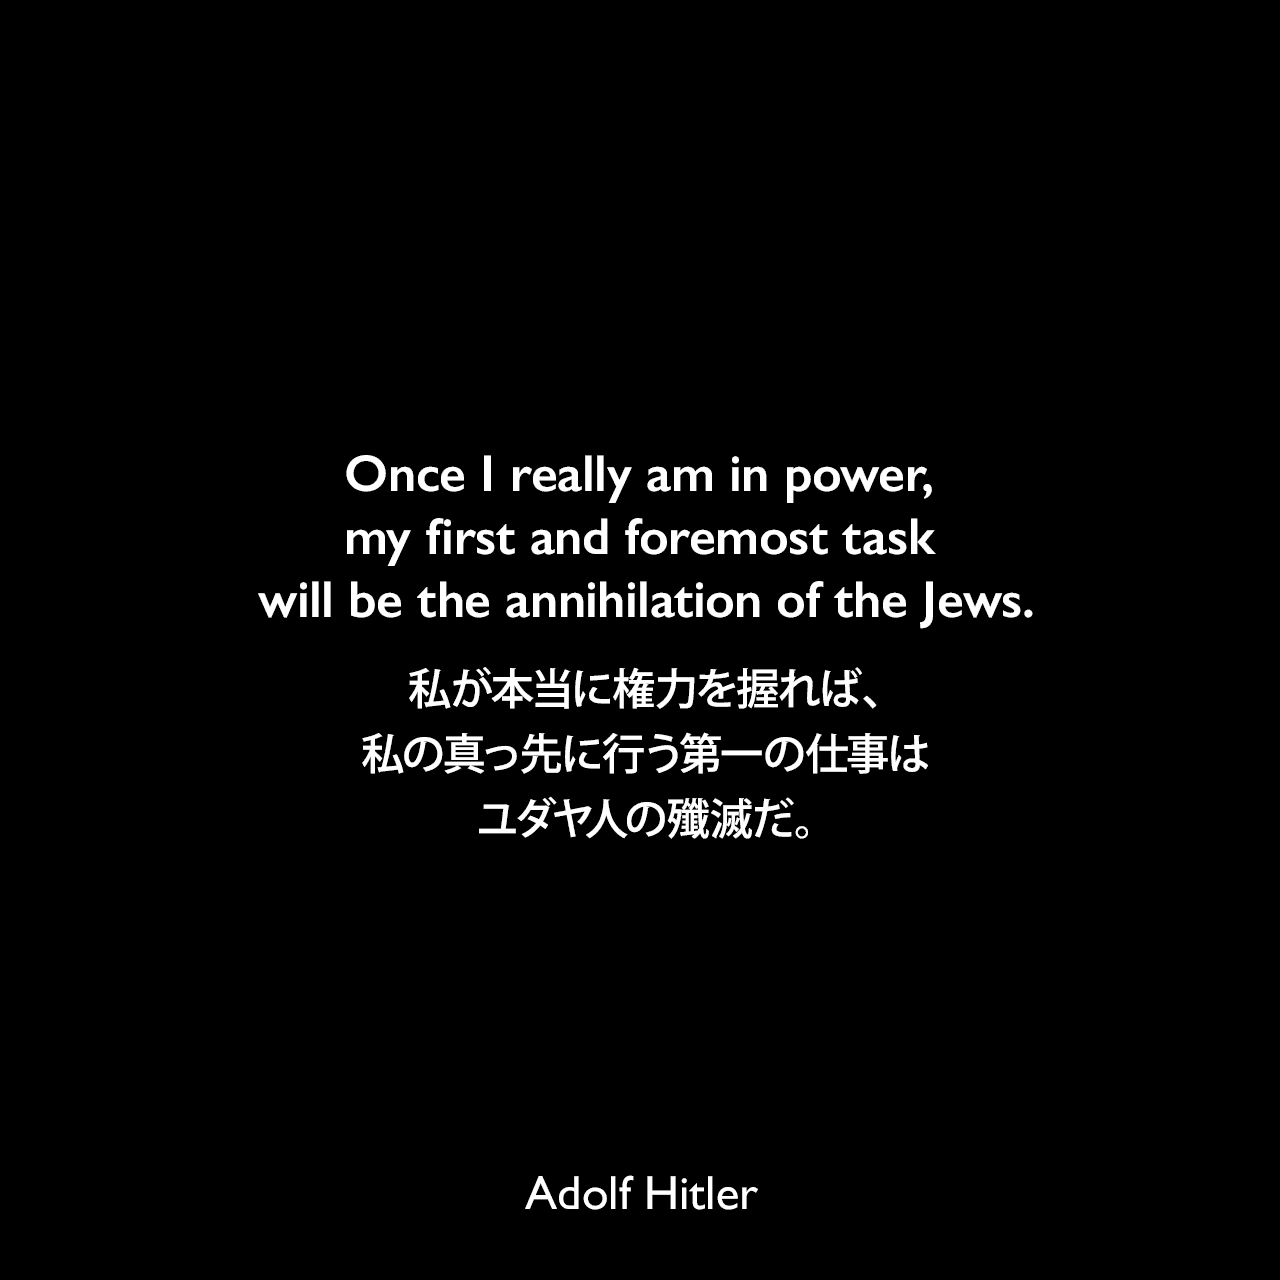 Once I really am in power, my first and foremost task will be the annihilation of the Jews.私が本当に権力を握れば、私の真っ先に行う第一の仕事はユダヤ人の殲滅だ。Adolf Hitler